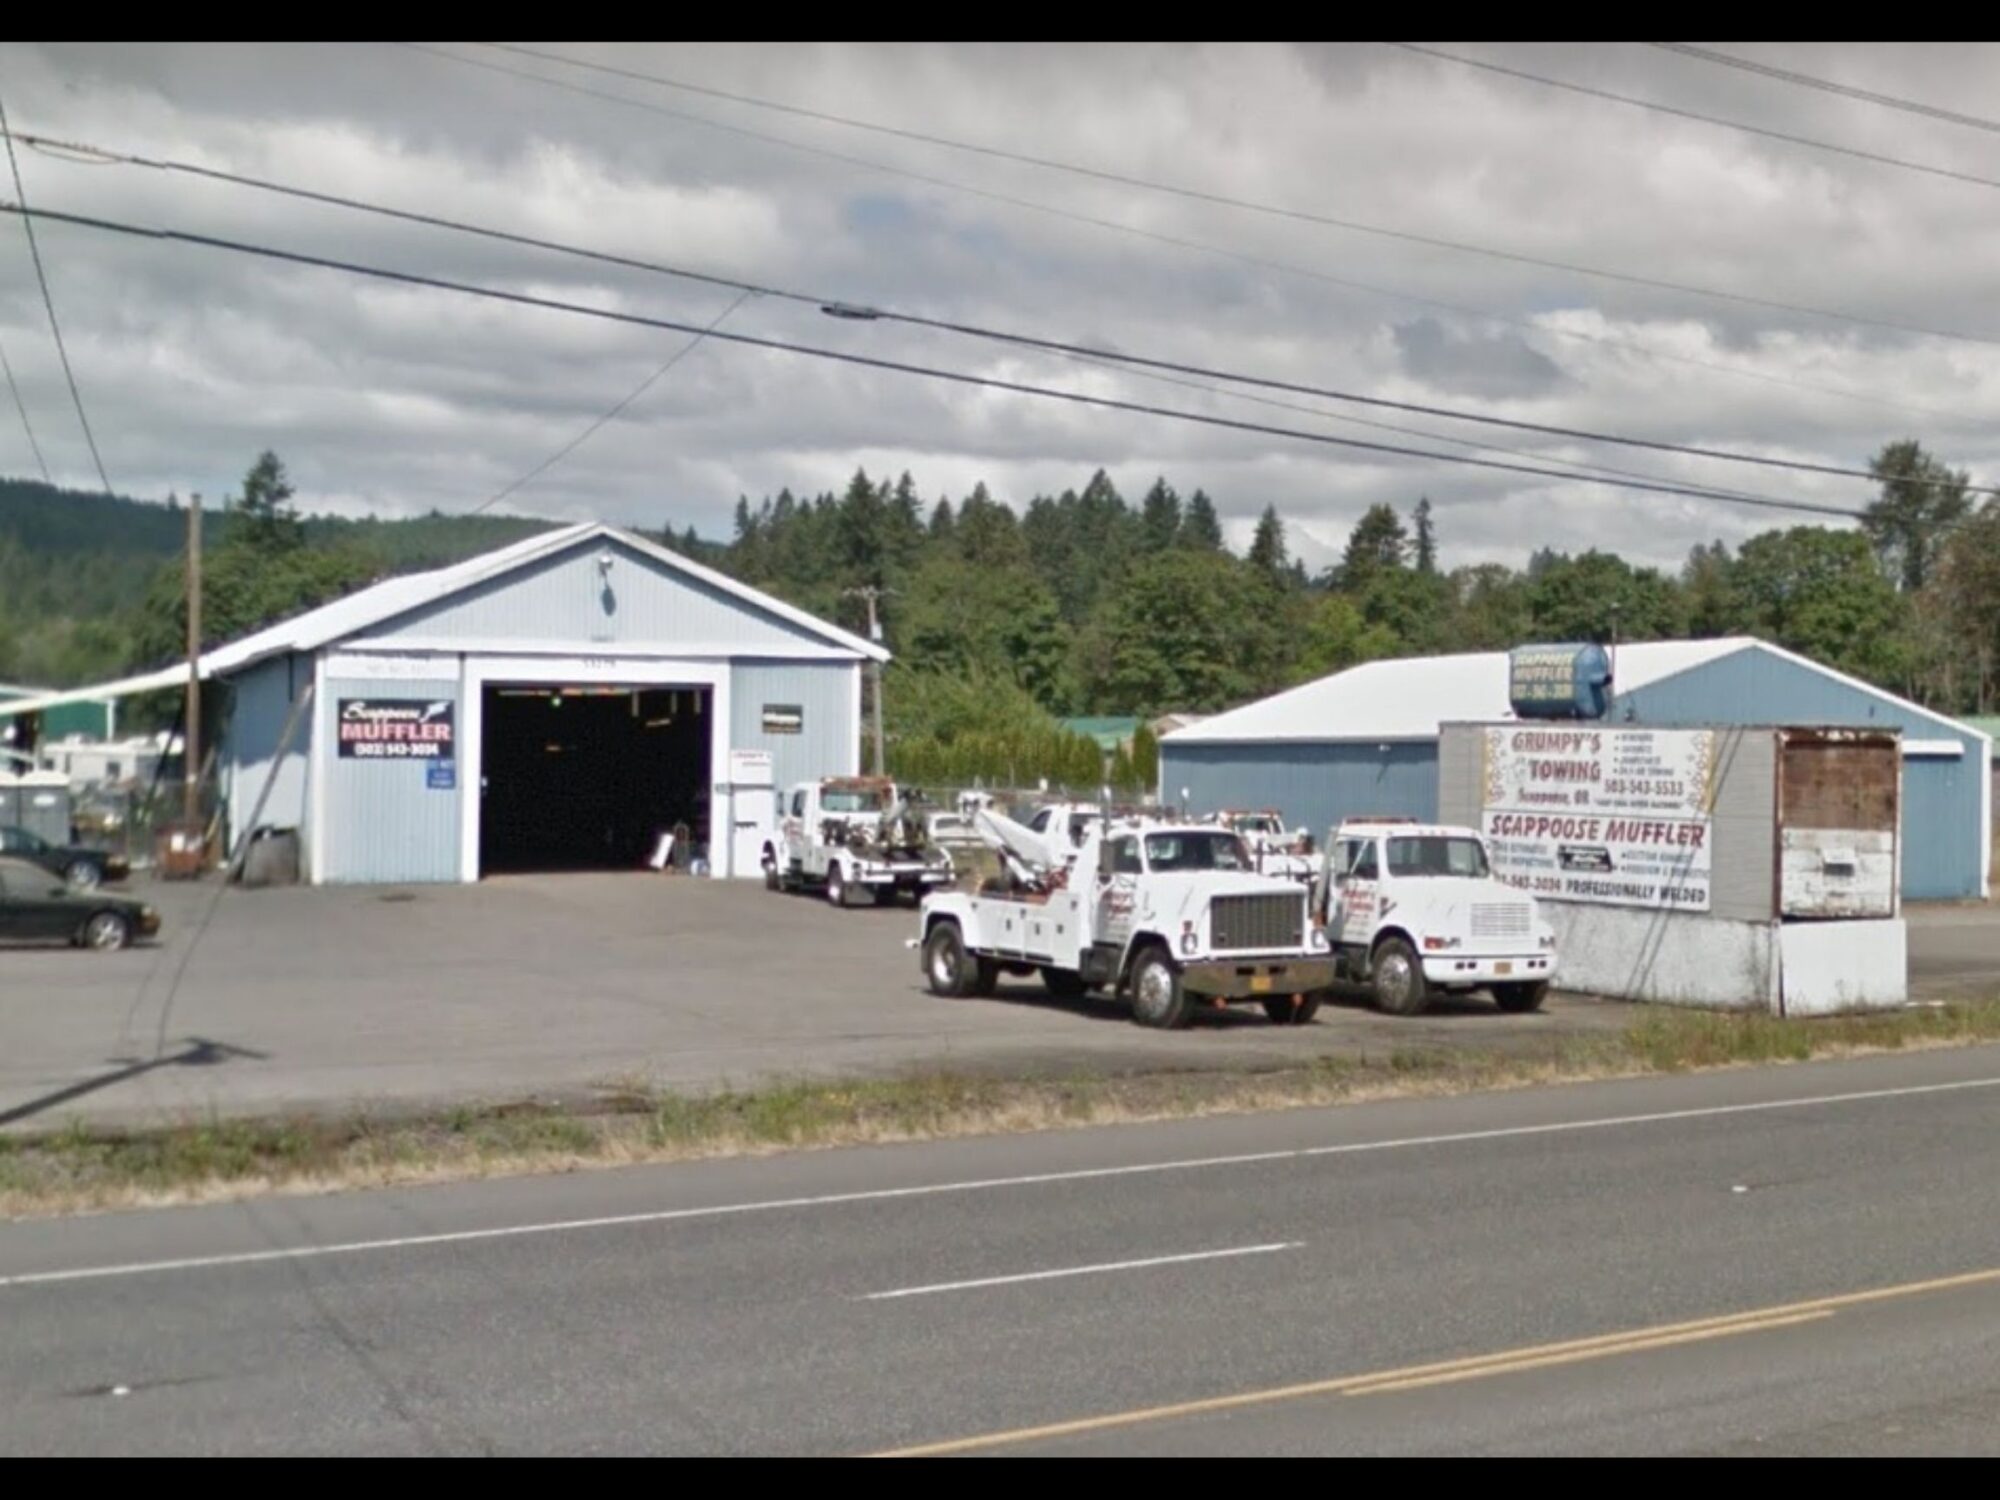 Grumpys Towing Scappoose Shooting